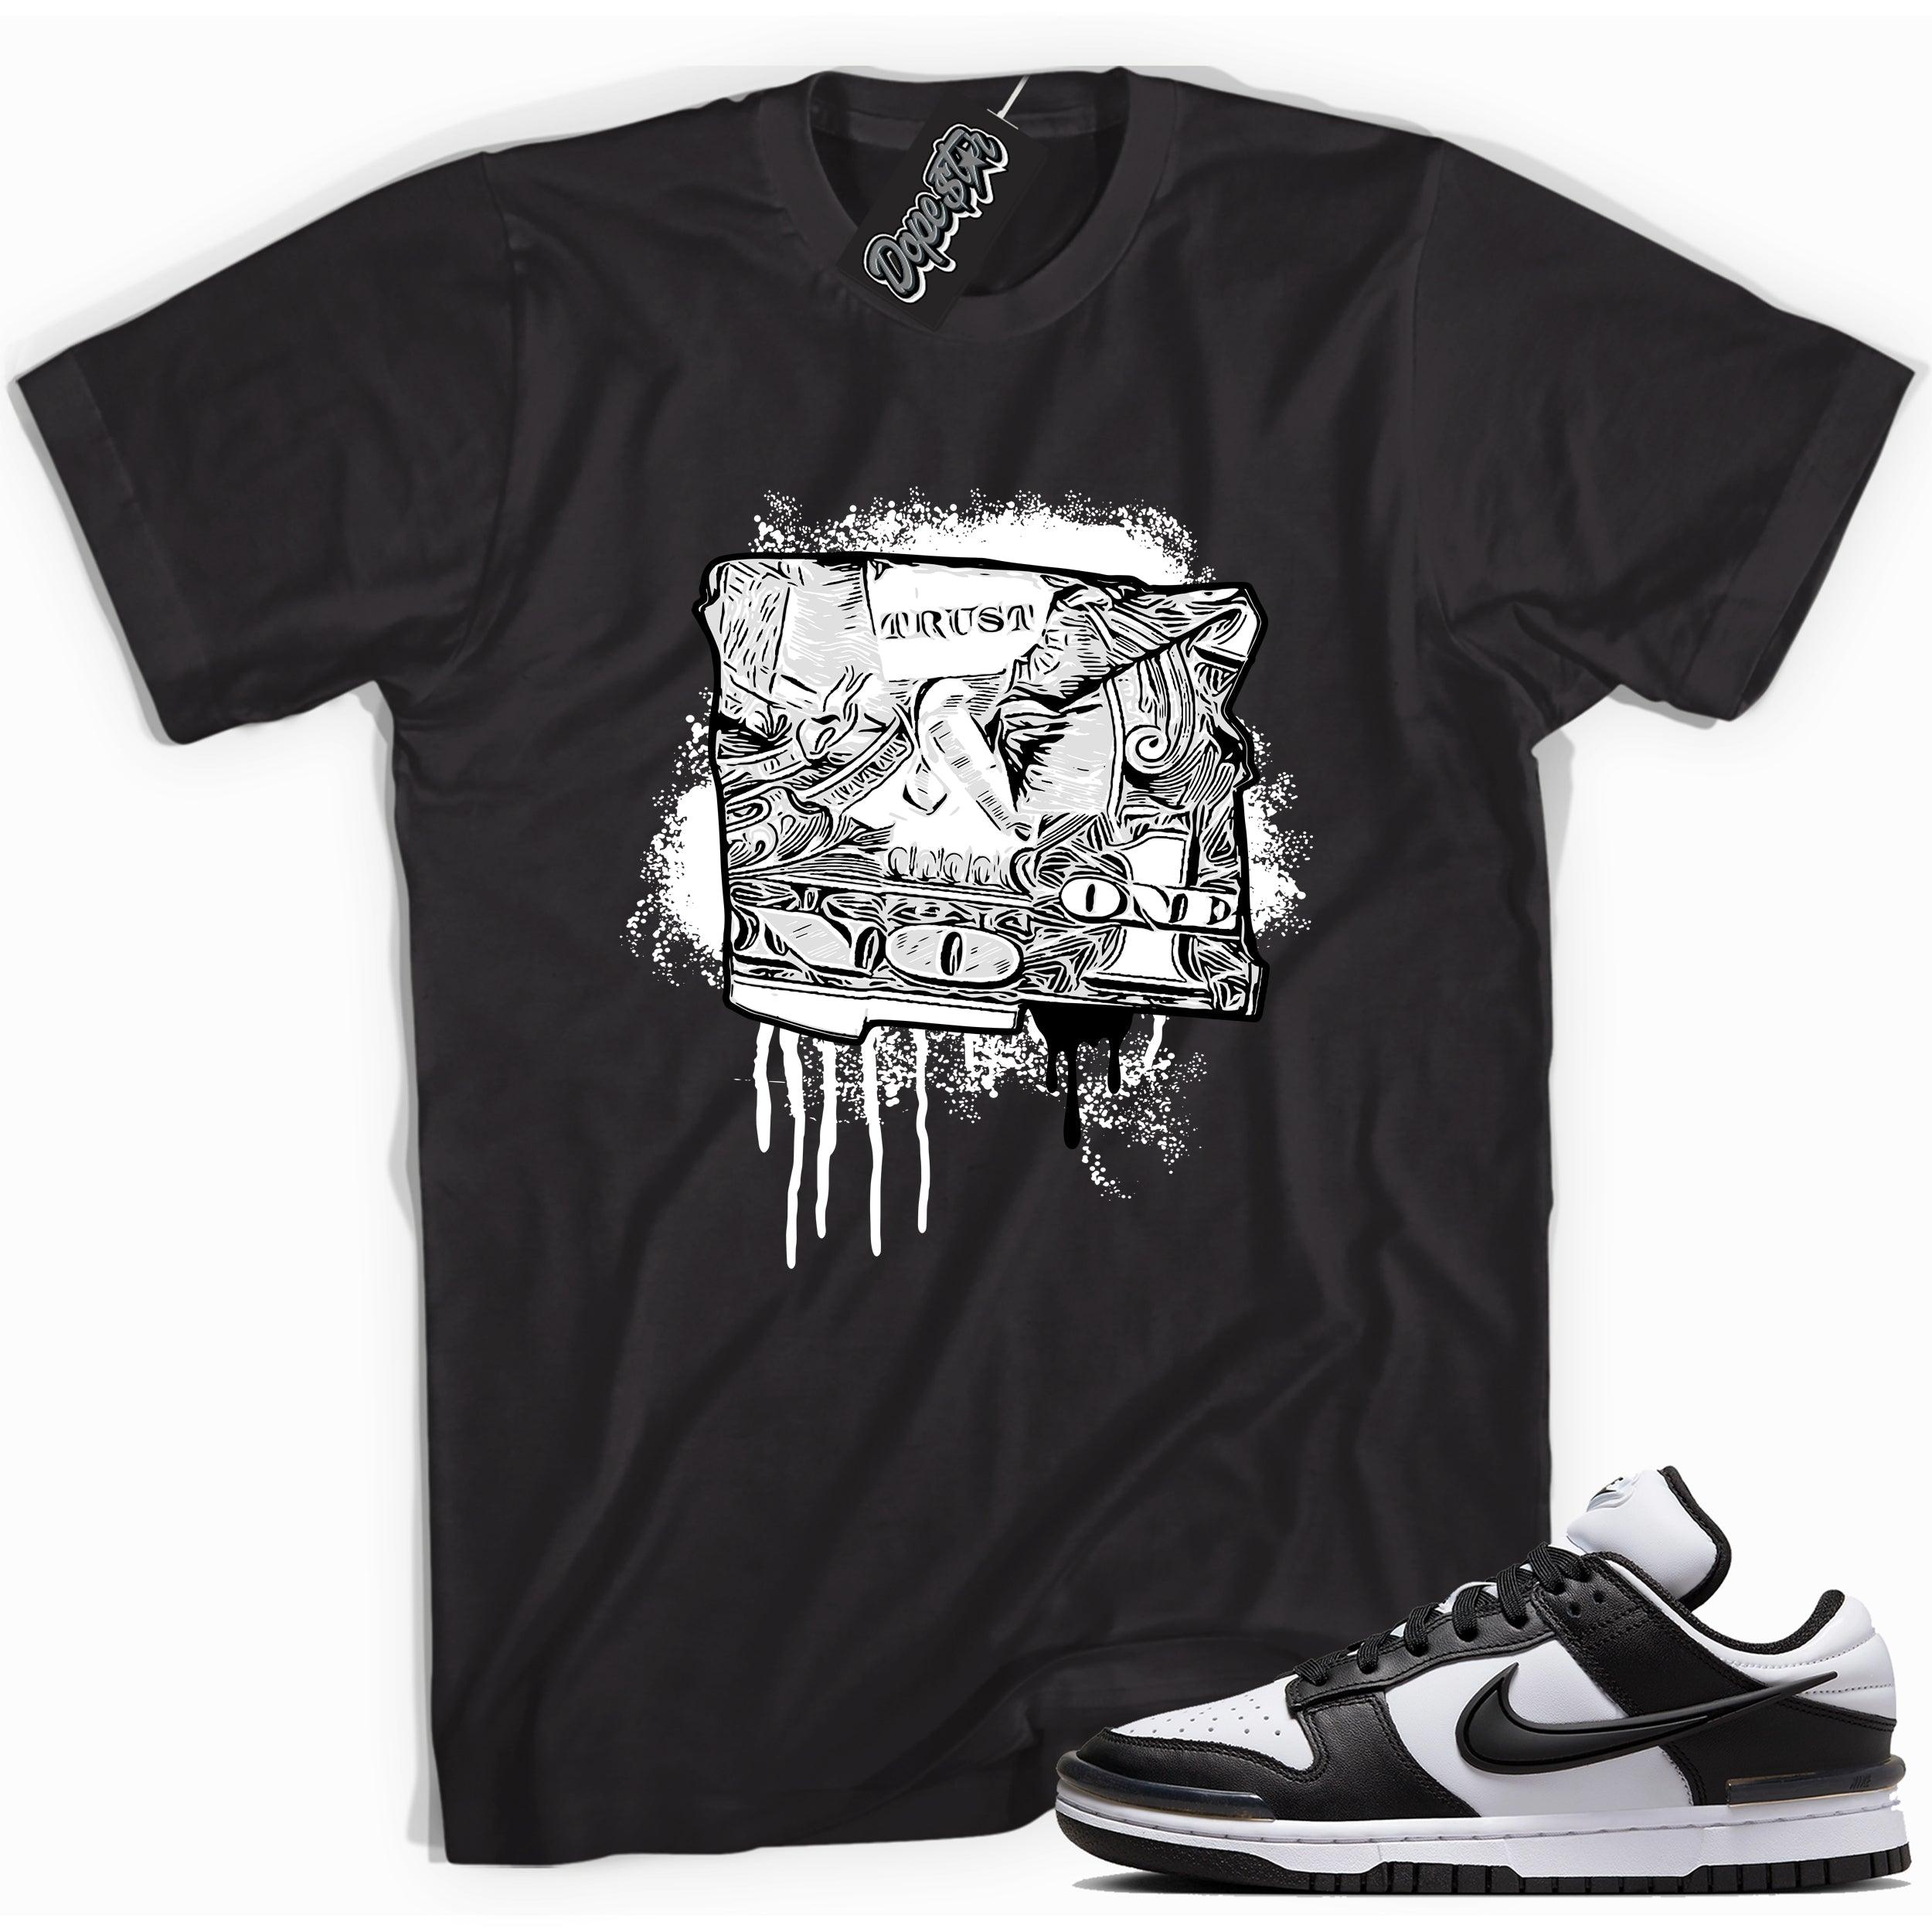 Cool black graphic tee with 'trust no one dollar' print, that perfectly matches Nike Dunk Low Twist Panda sneakers.